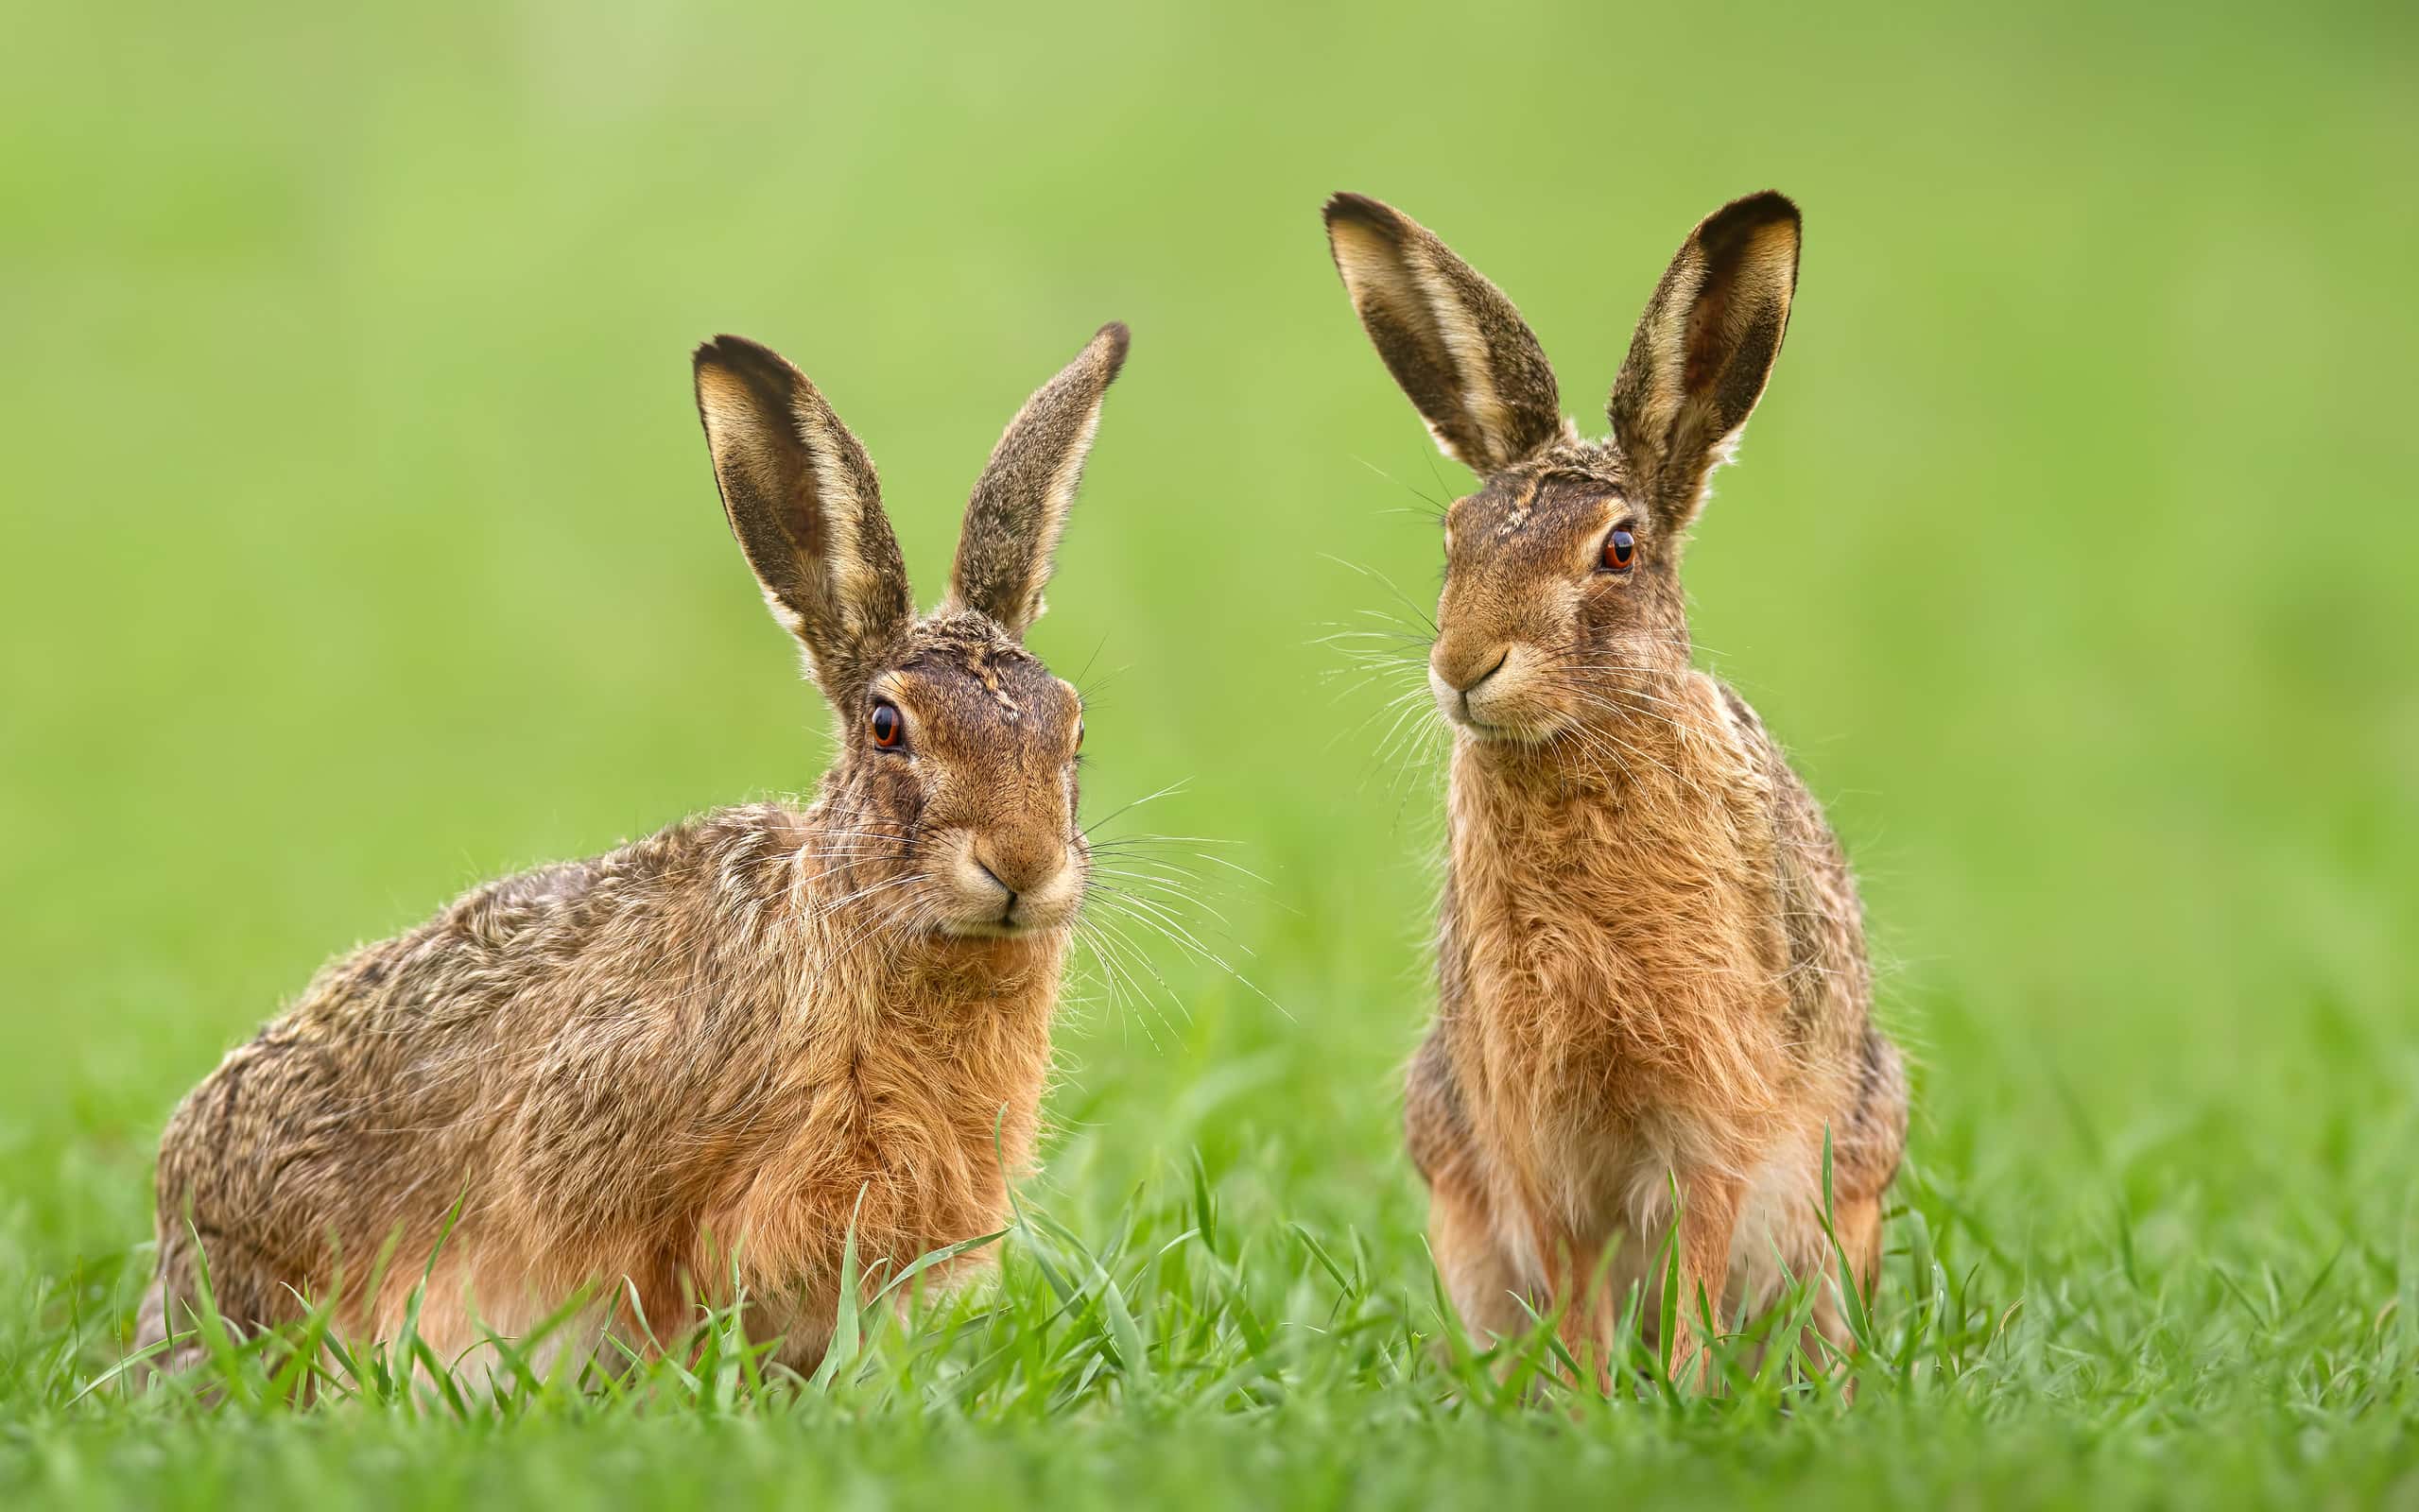 Two brown hares sitting in green grass on a meadow in springtime.